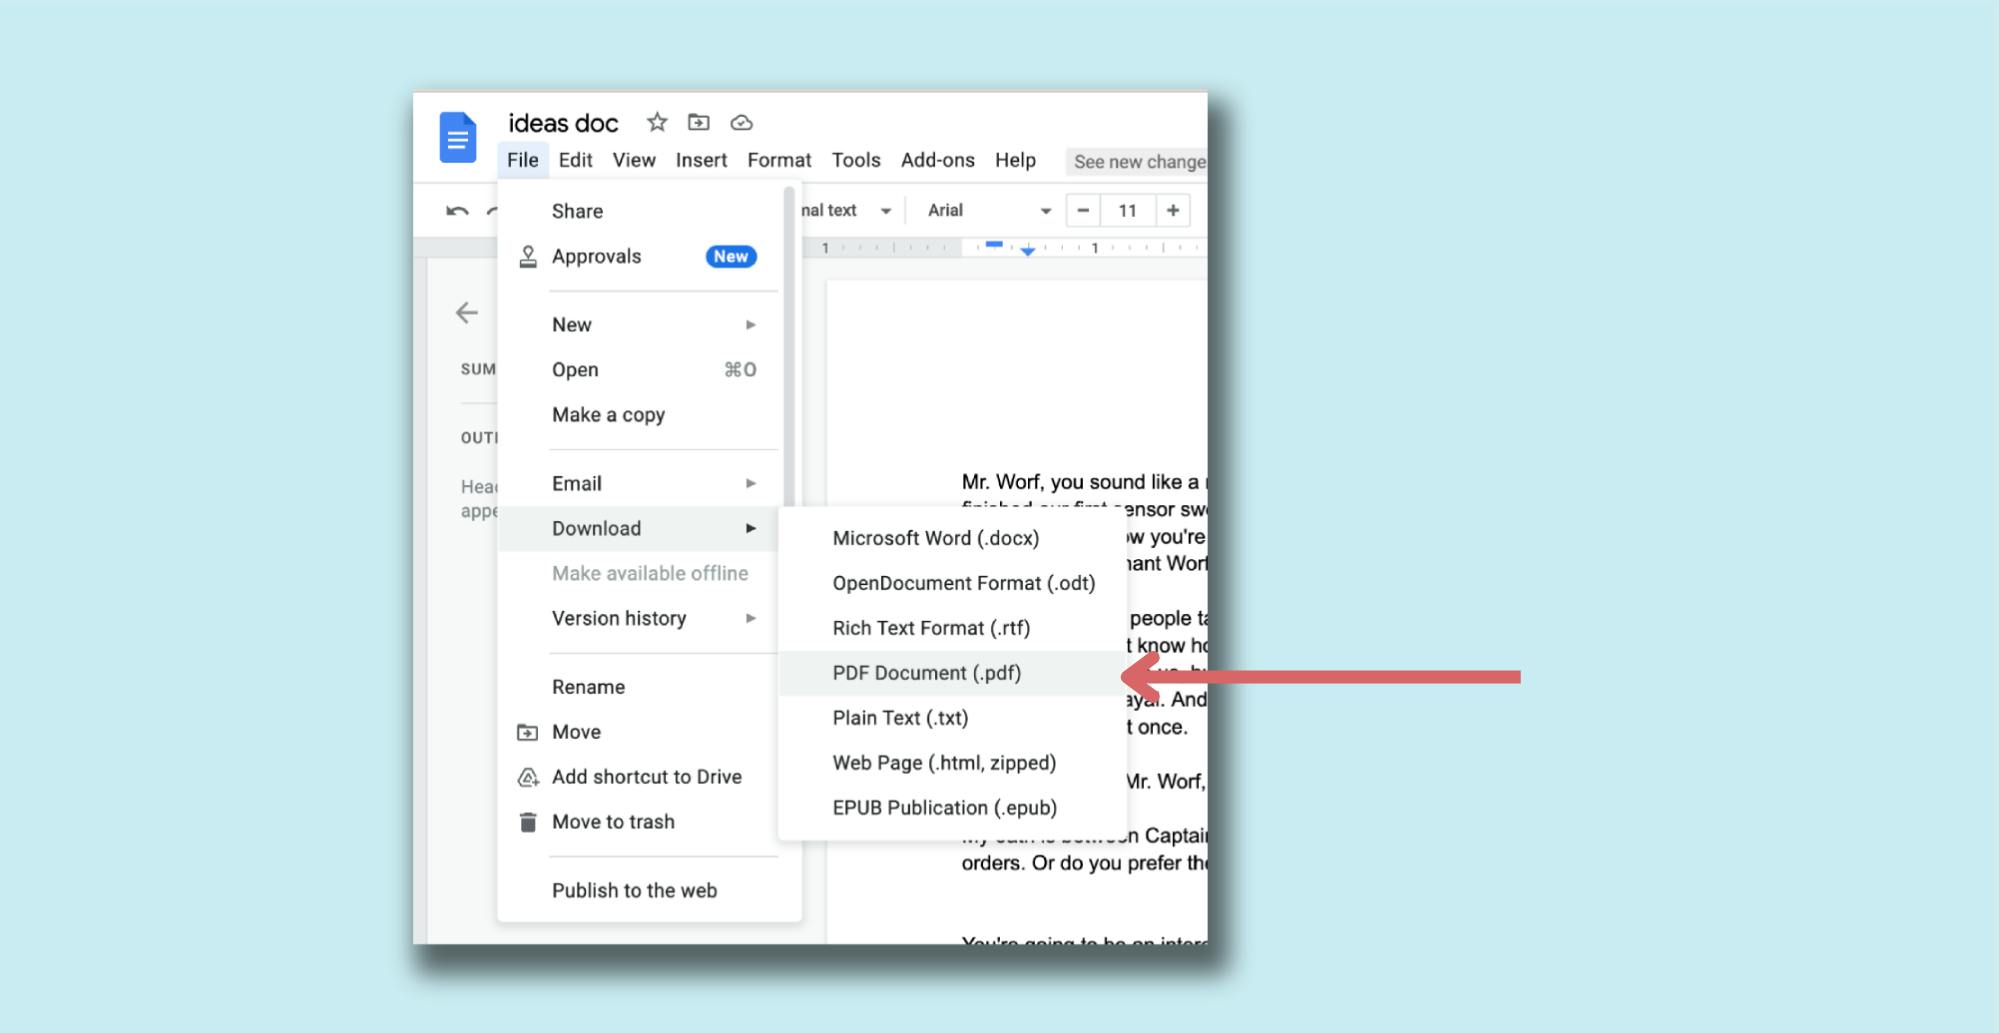 Access your Google Drive files in Acrobat